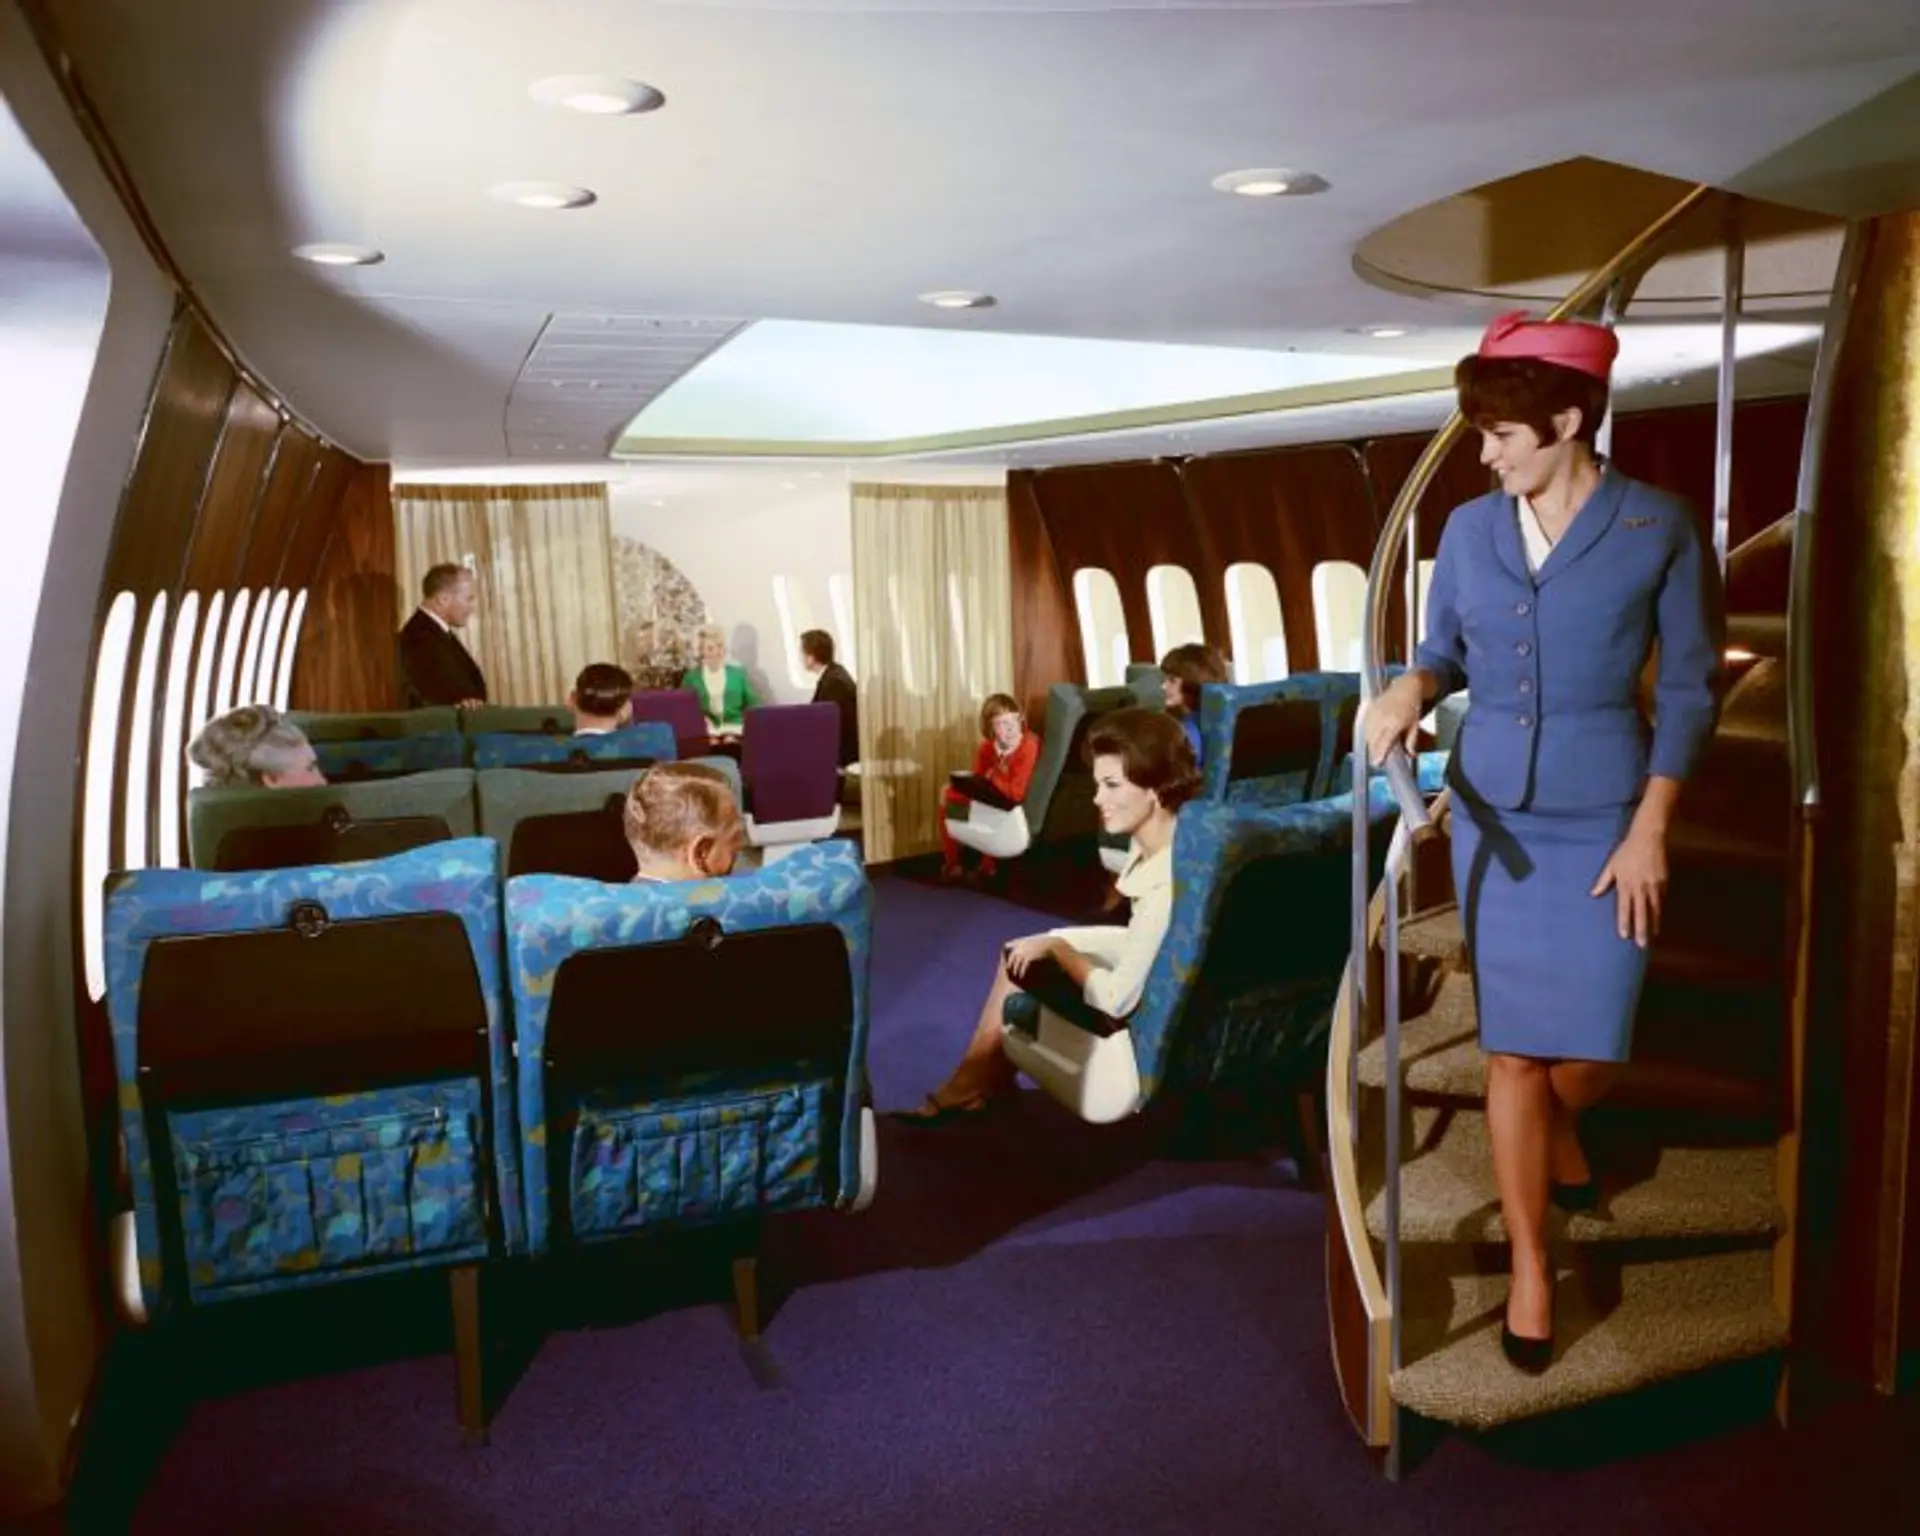 Airlines Articles - Which airlines still fly "jumbo jets"?